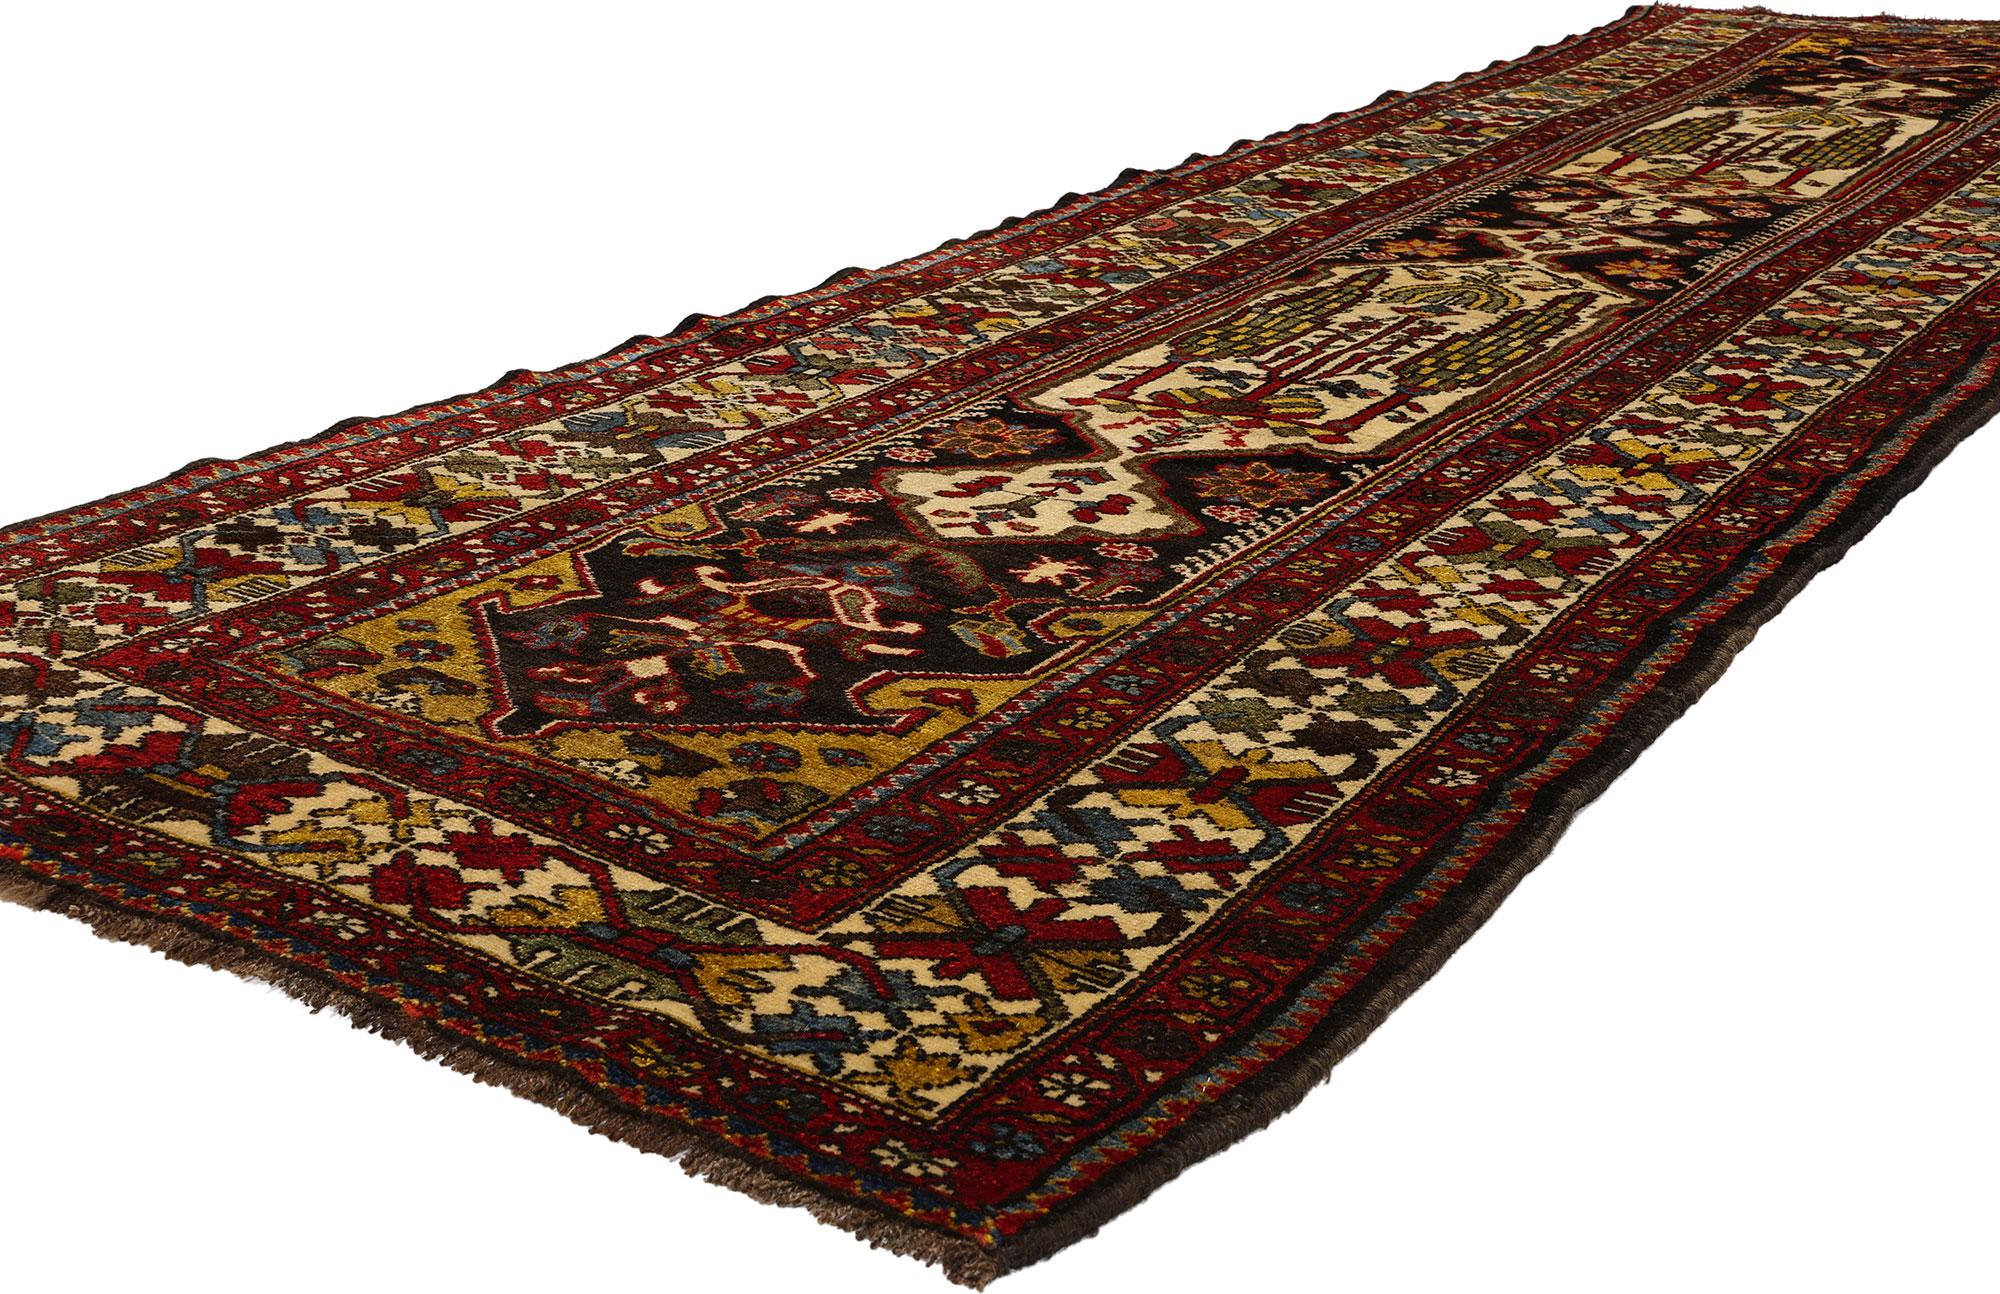 53879 Vintage Persian Bakhtiari Rug Runner, 03'06 x 12'02. Persian Bakhtiari carpet runners are long, narrow rugs handwoven by the Bakhtiari tribe in the Zagros Mountains of Iran. Renowned for their exquisite craftsmanship and intricate designs,